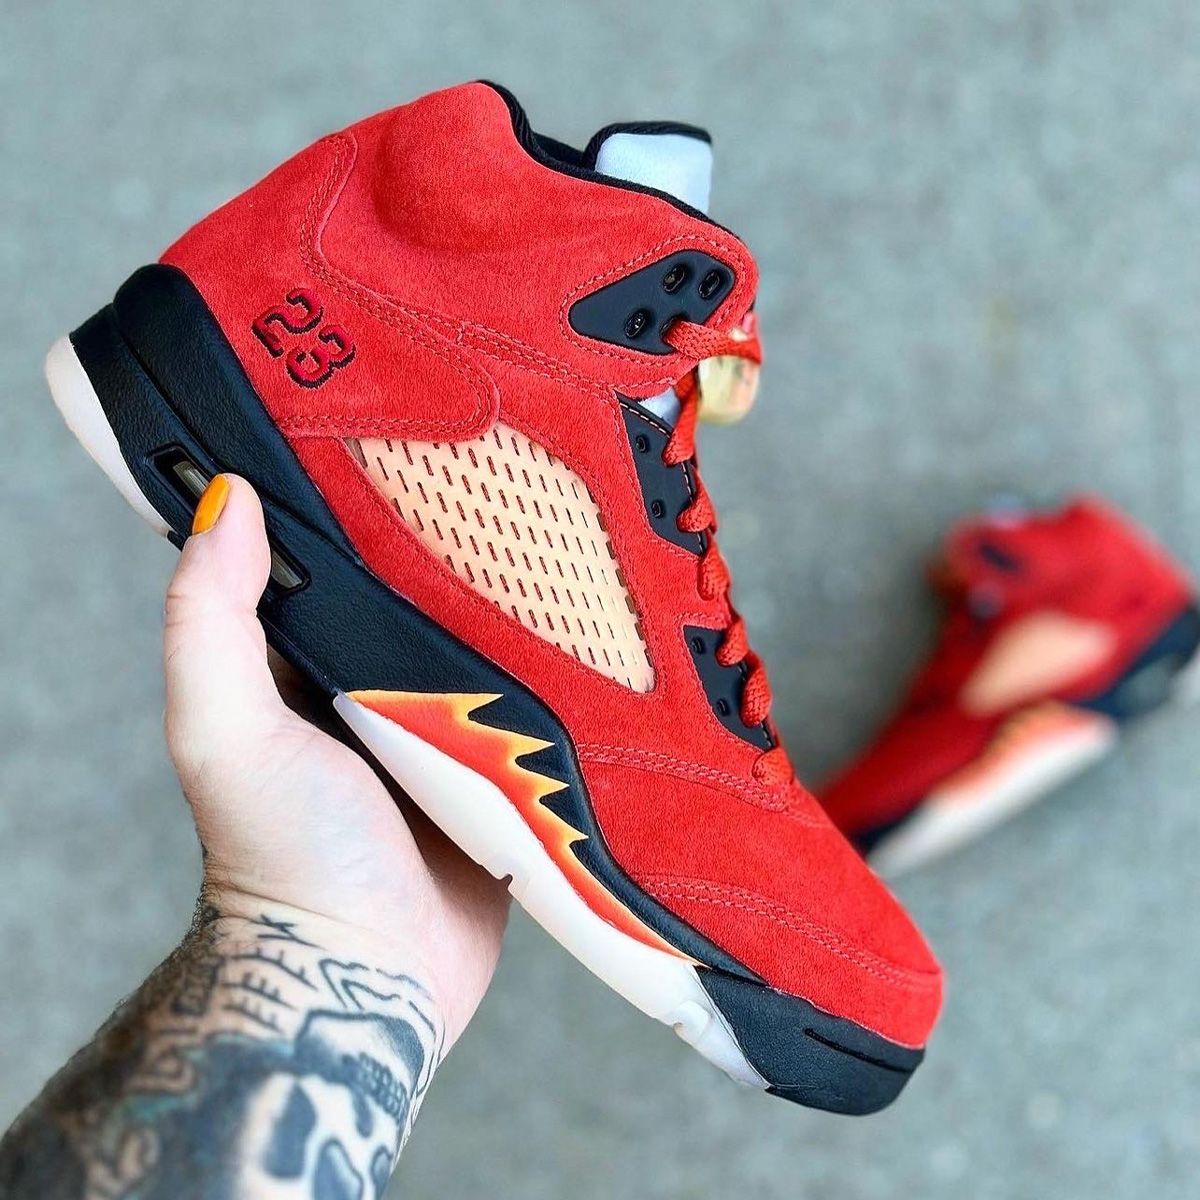 Official Images // Air Jordan 5 “Dunk on Mars” | House of Heat°